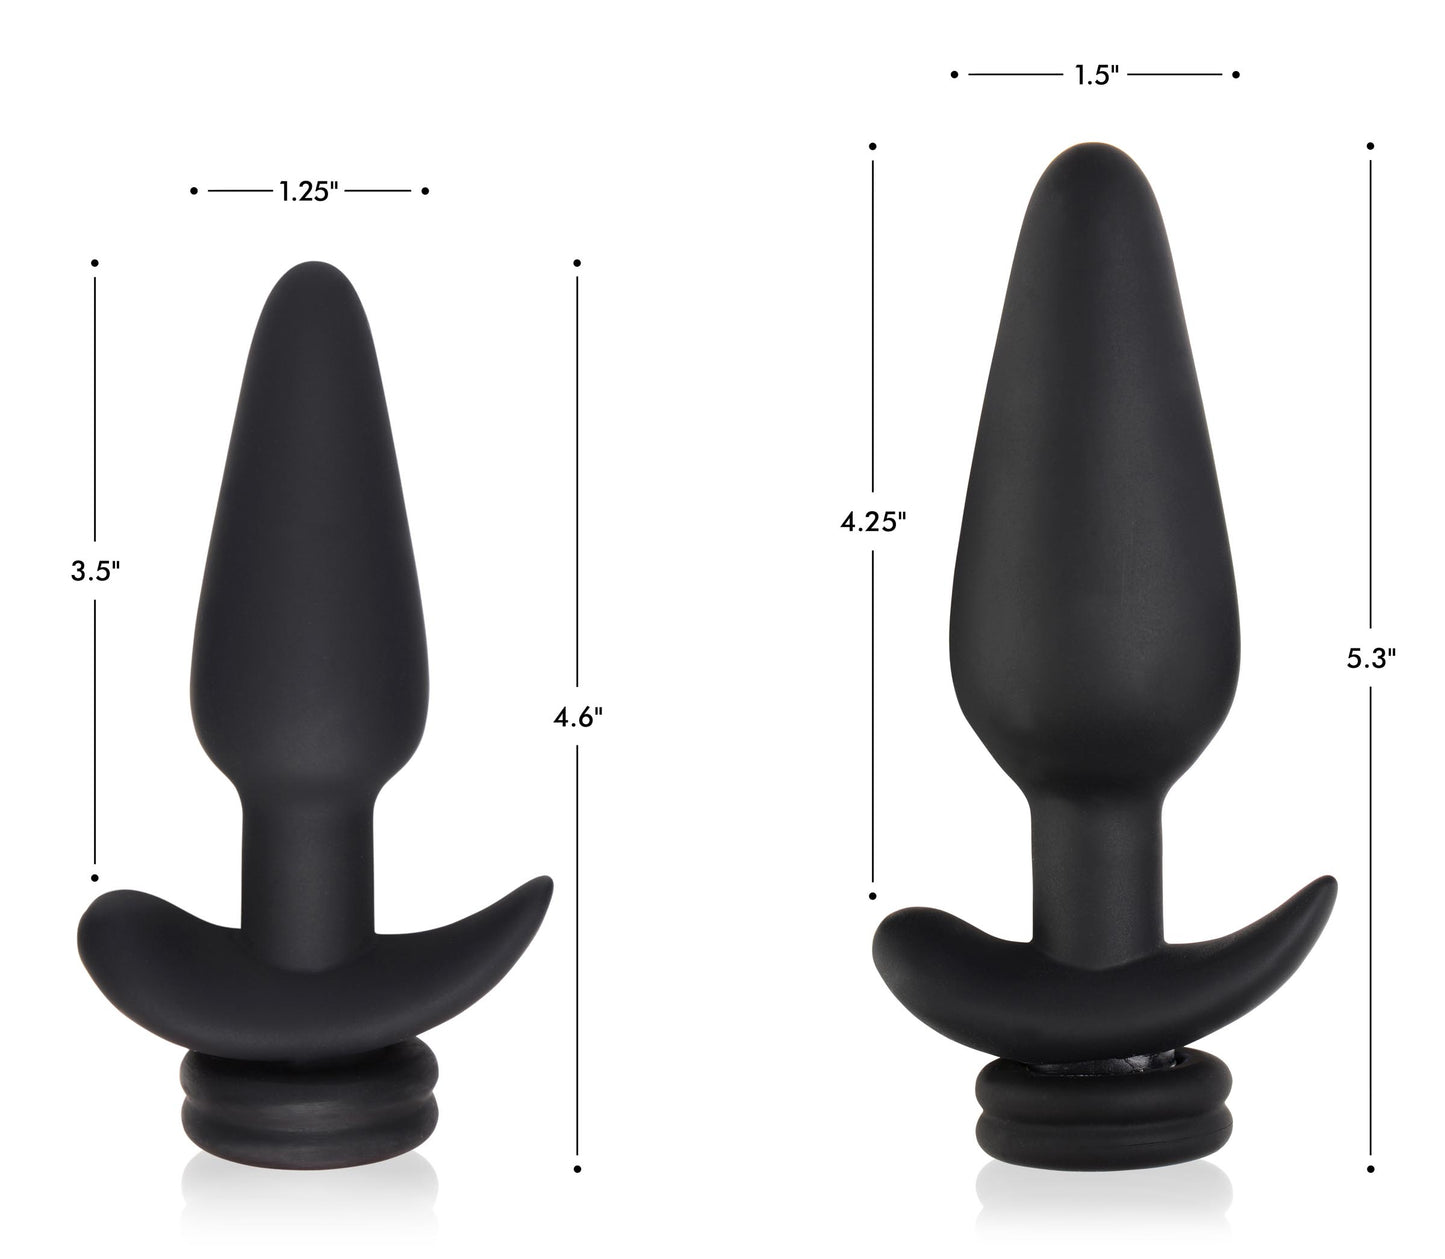 Large Vibrating Anal Plug With Interchangeable Bunny Tail - White